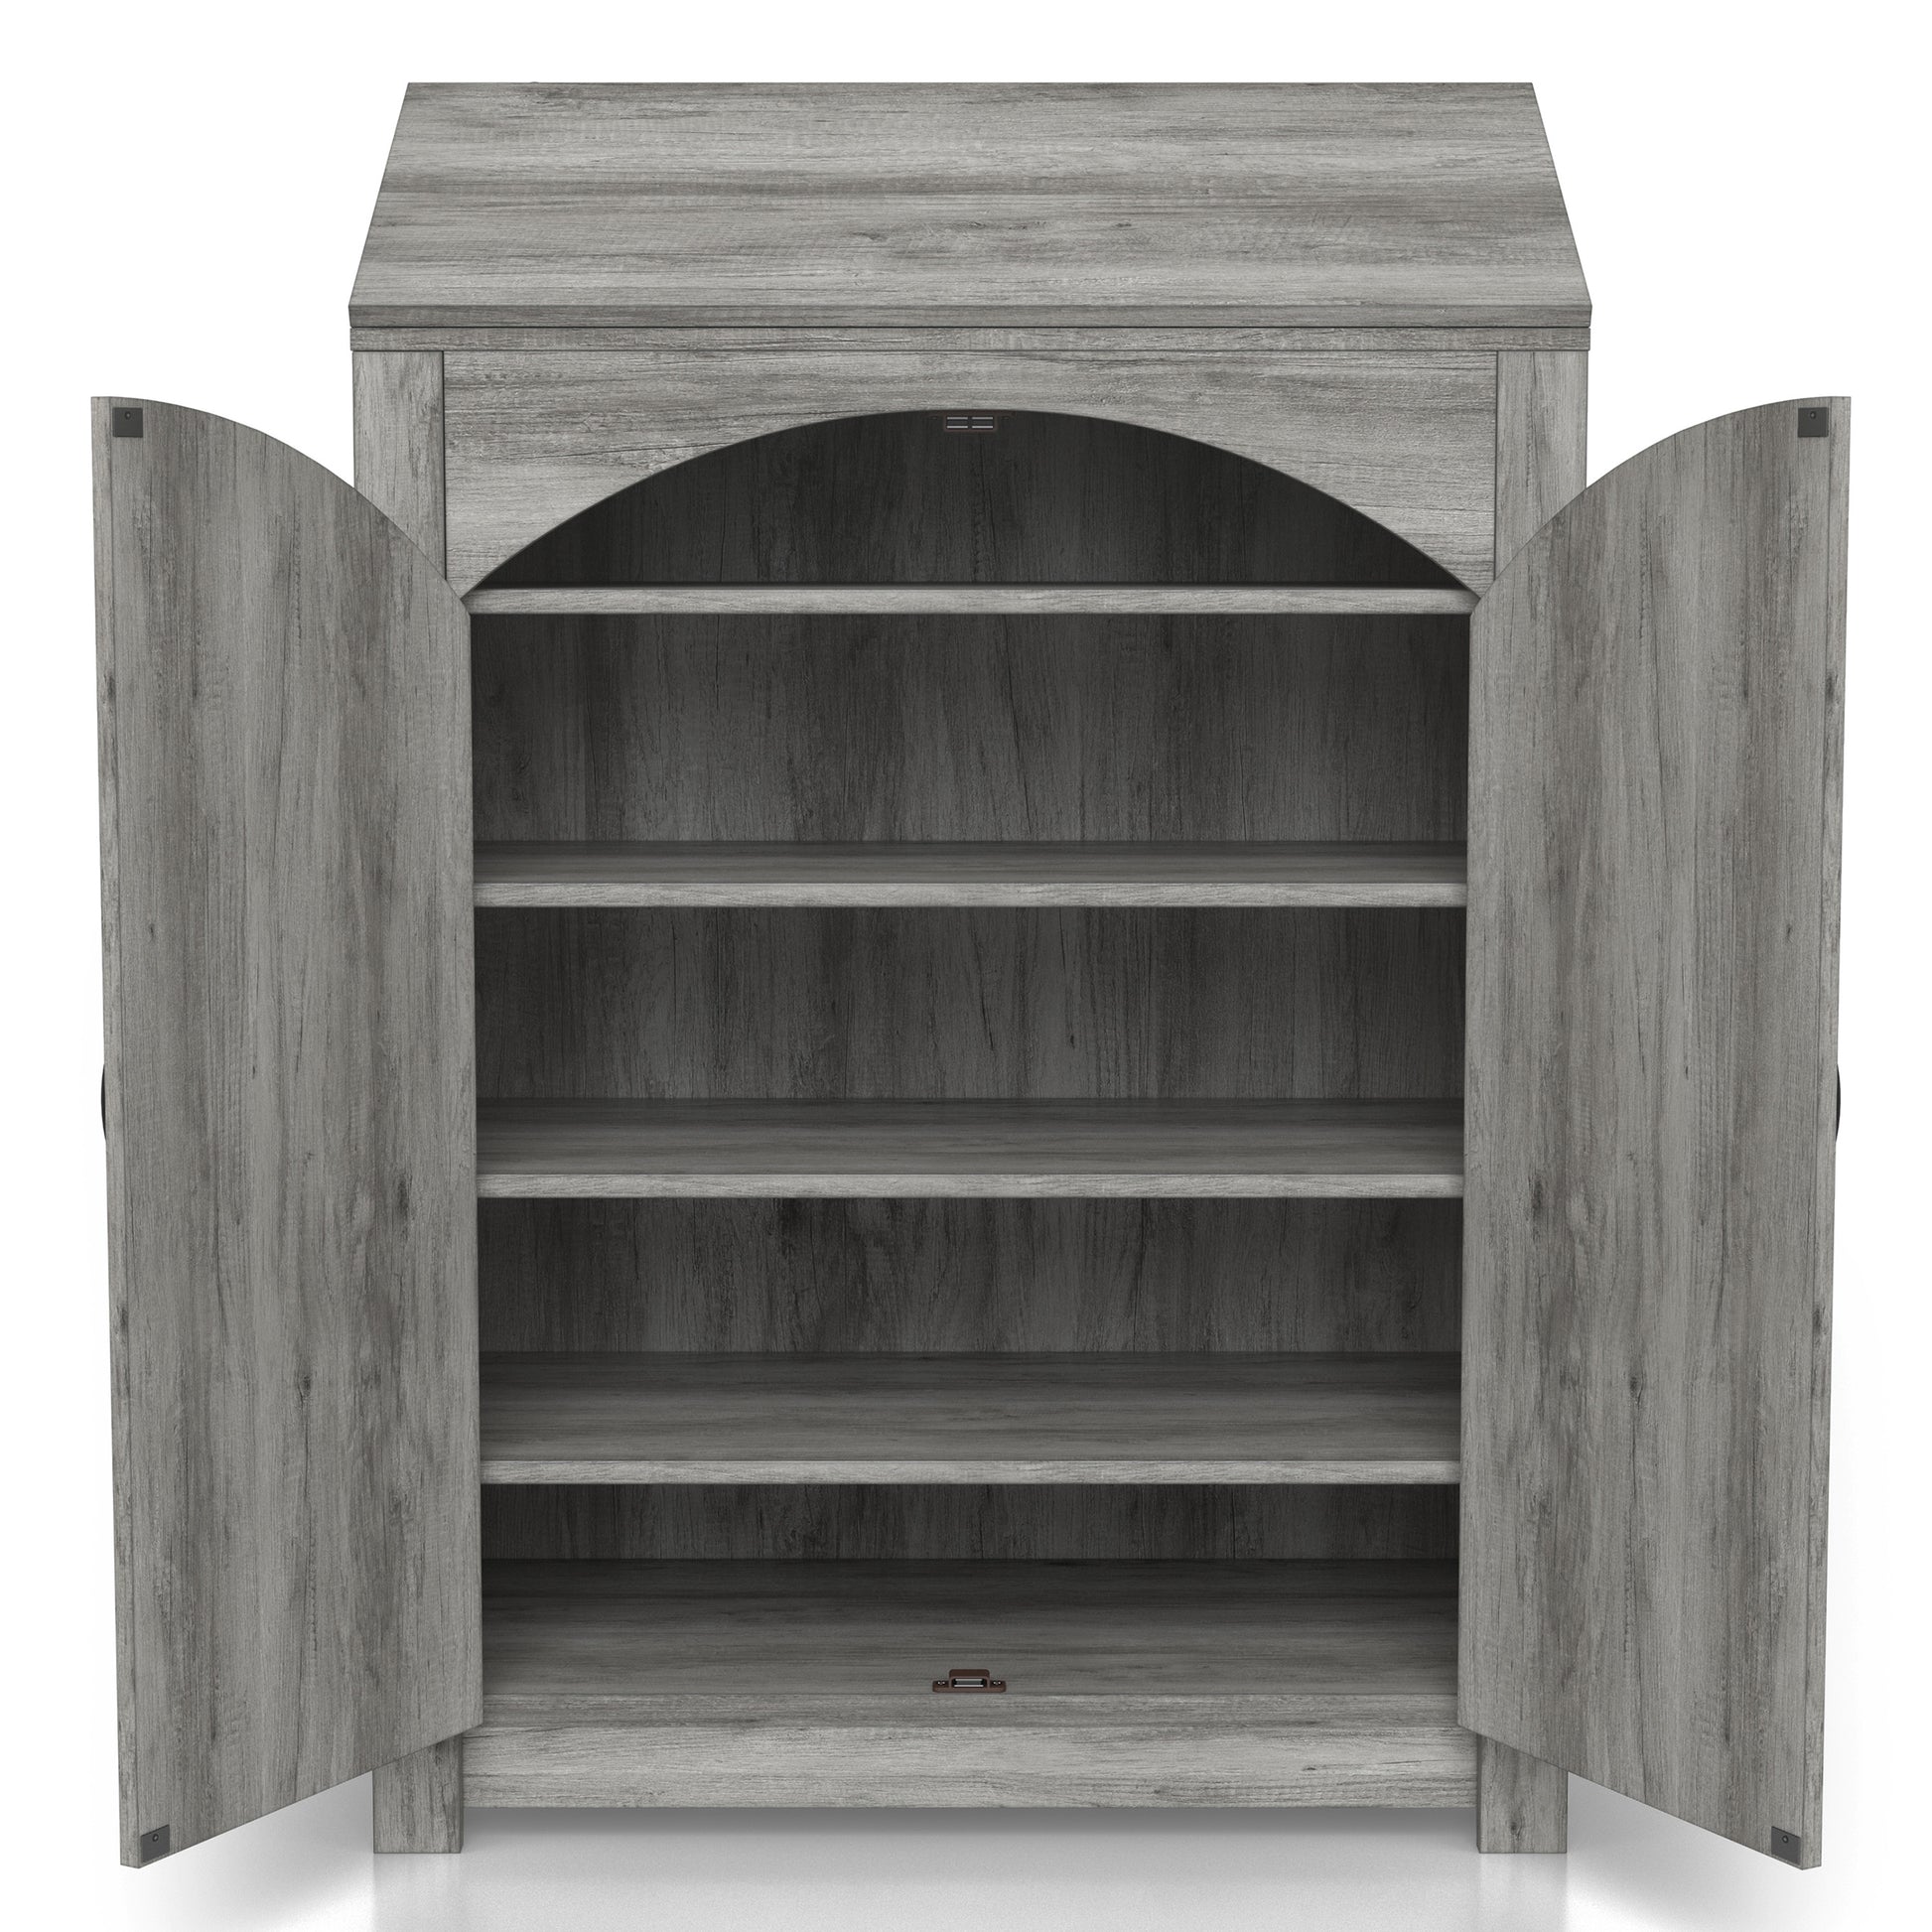 Front-facing farmhouse vintage gray oak four-shelf shoe cabinet with a lift-top and both doors open on a white background